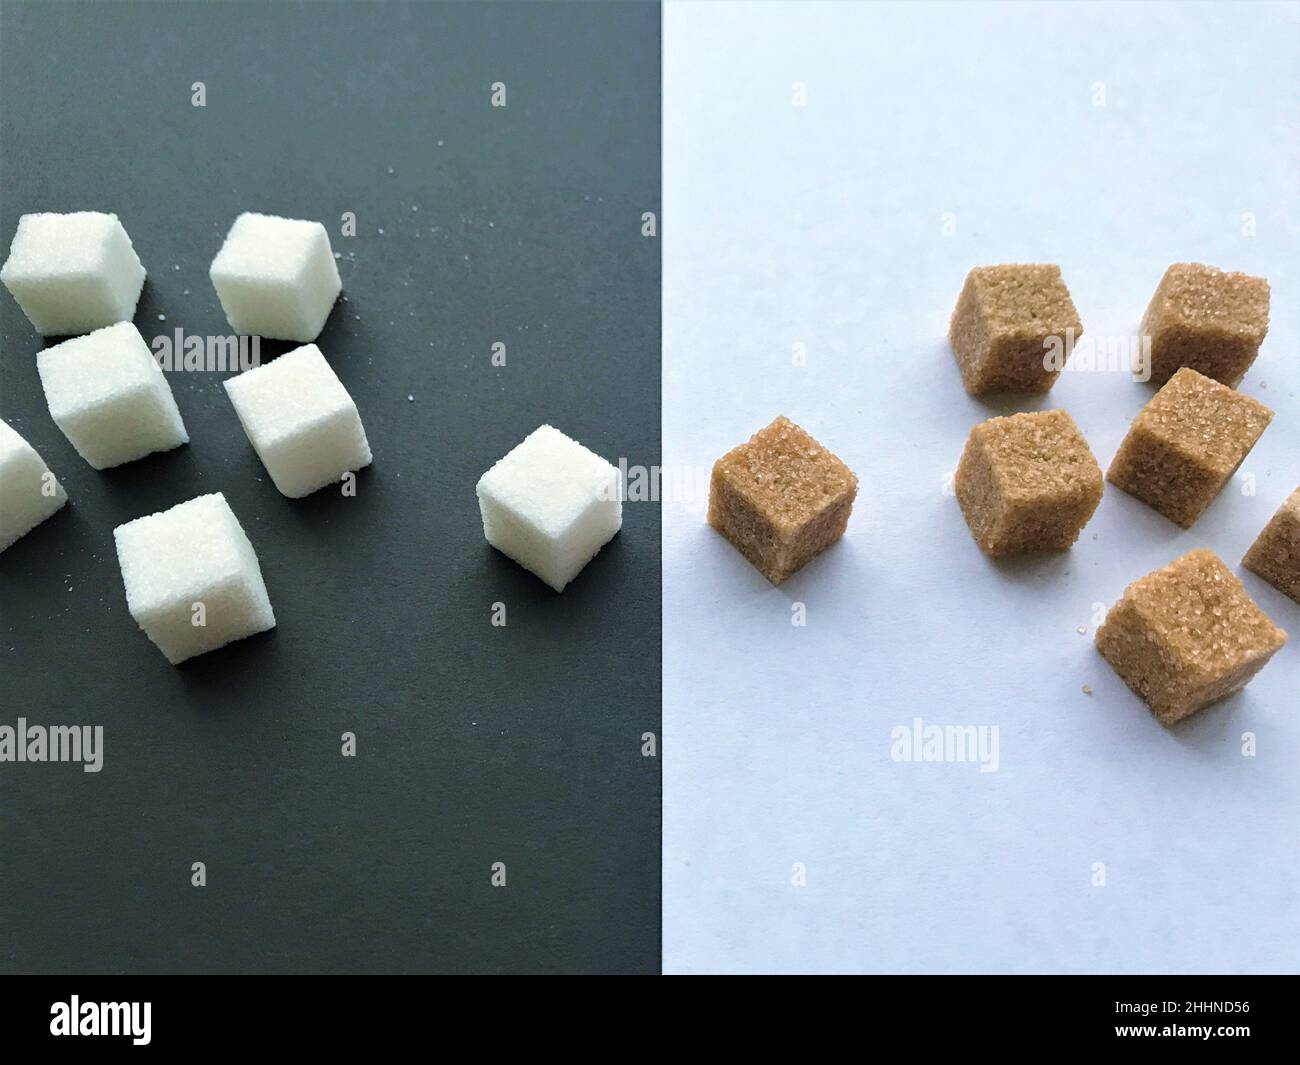 Confrontation groups of sugars: pieces of refined white on a black background and cane brown on a white background opposite each other. Stock Photo